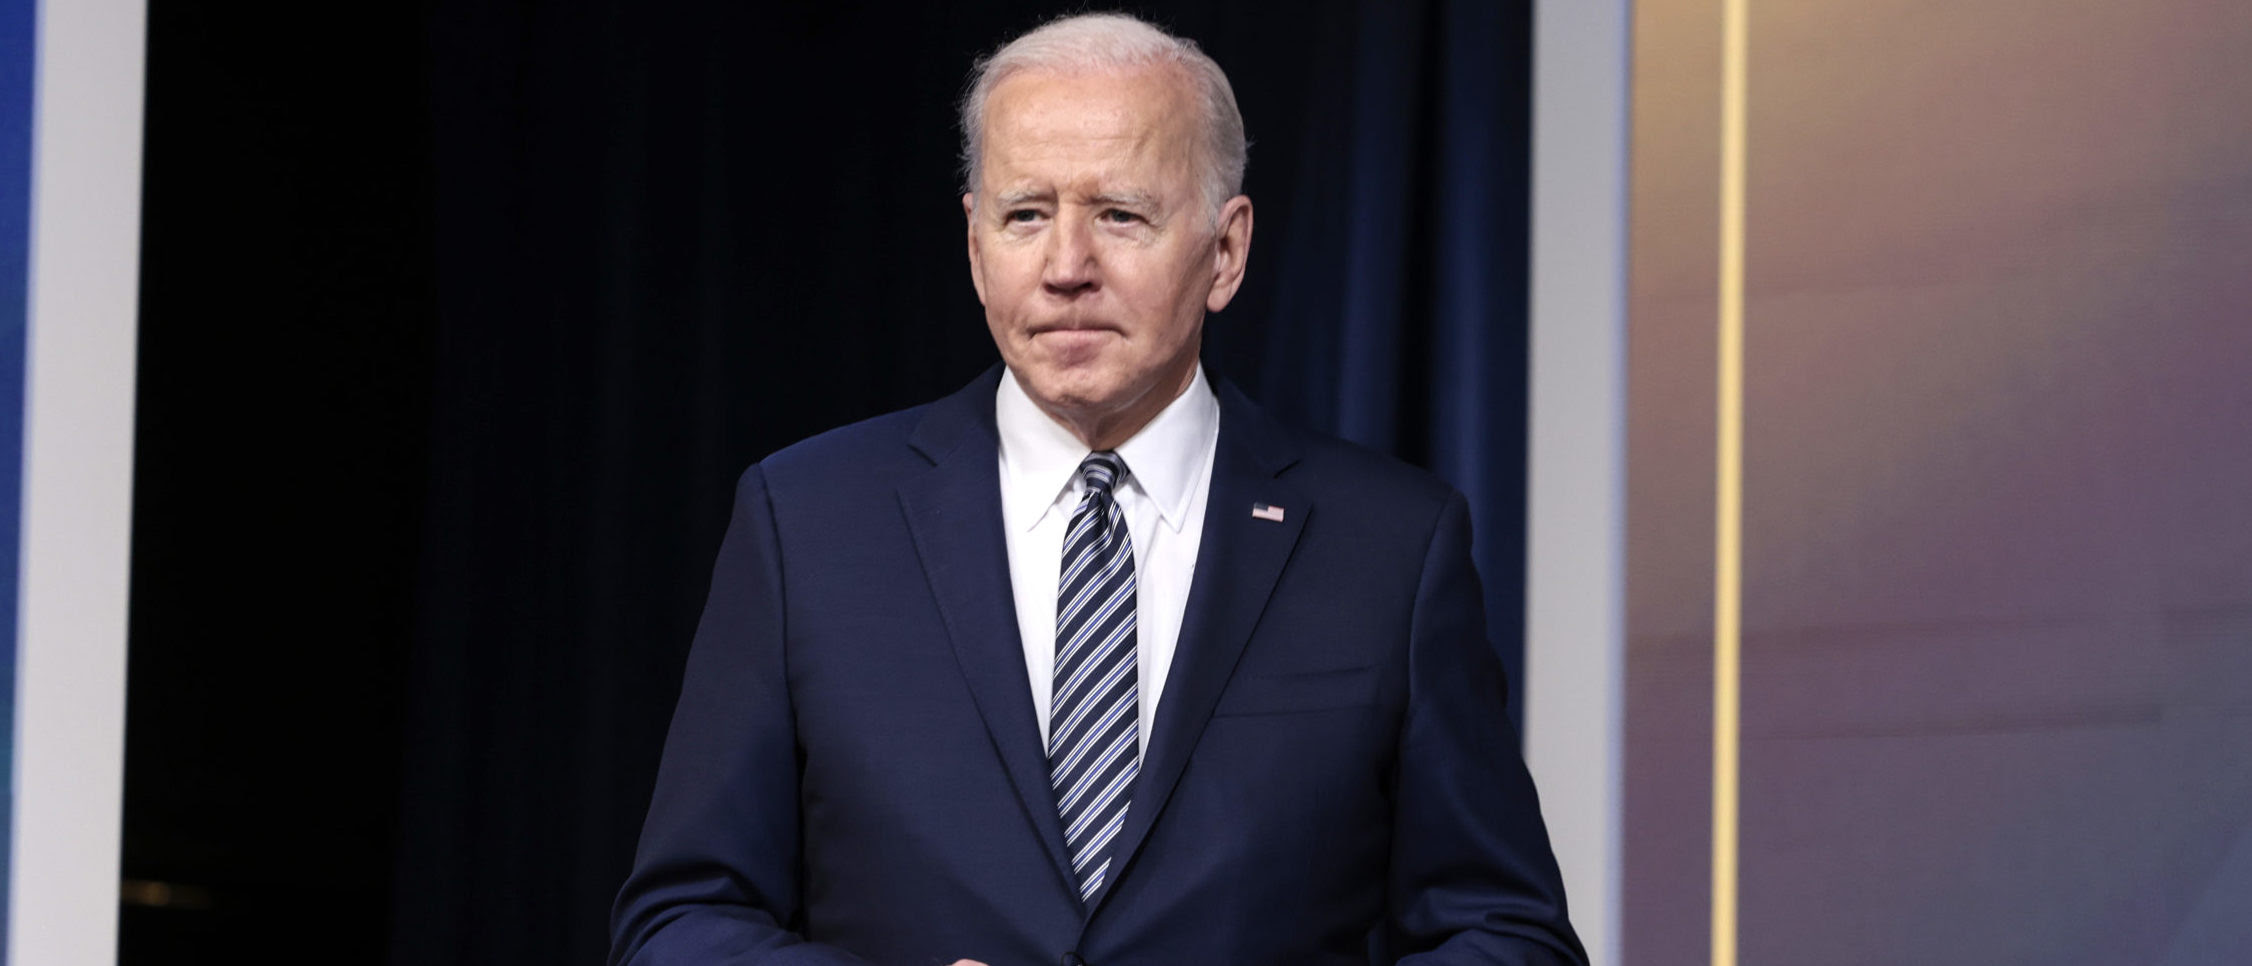 Biden’s War On Oil, Gas Drilling Likely To Hurt Environmental Conservation Programs